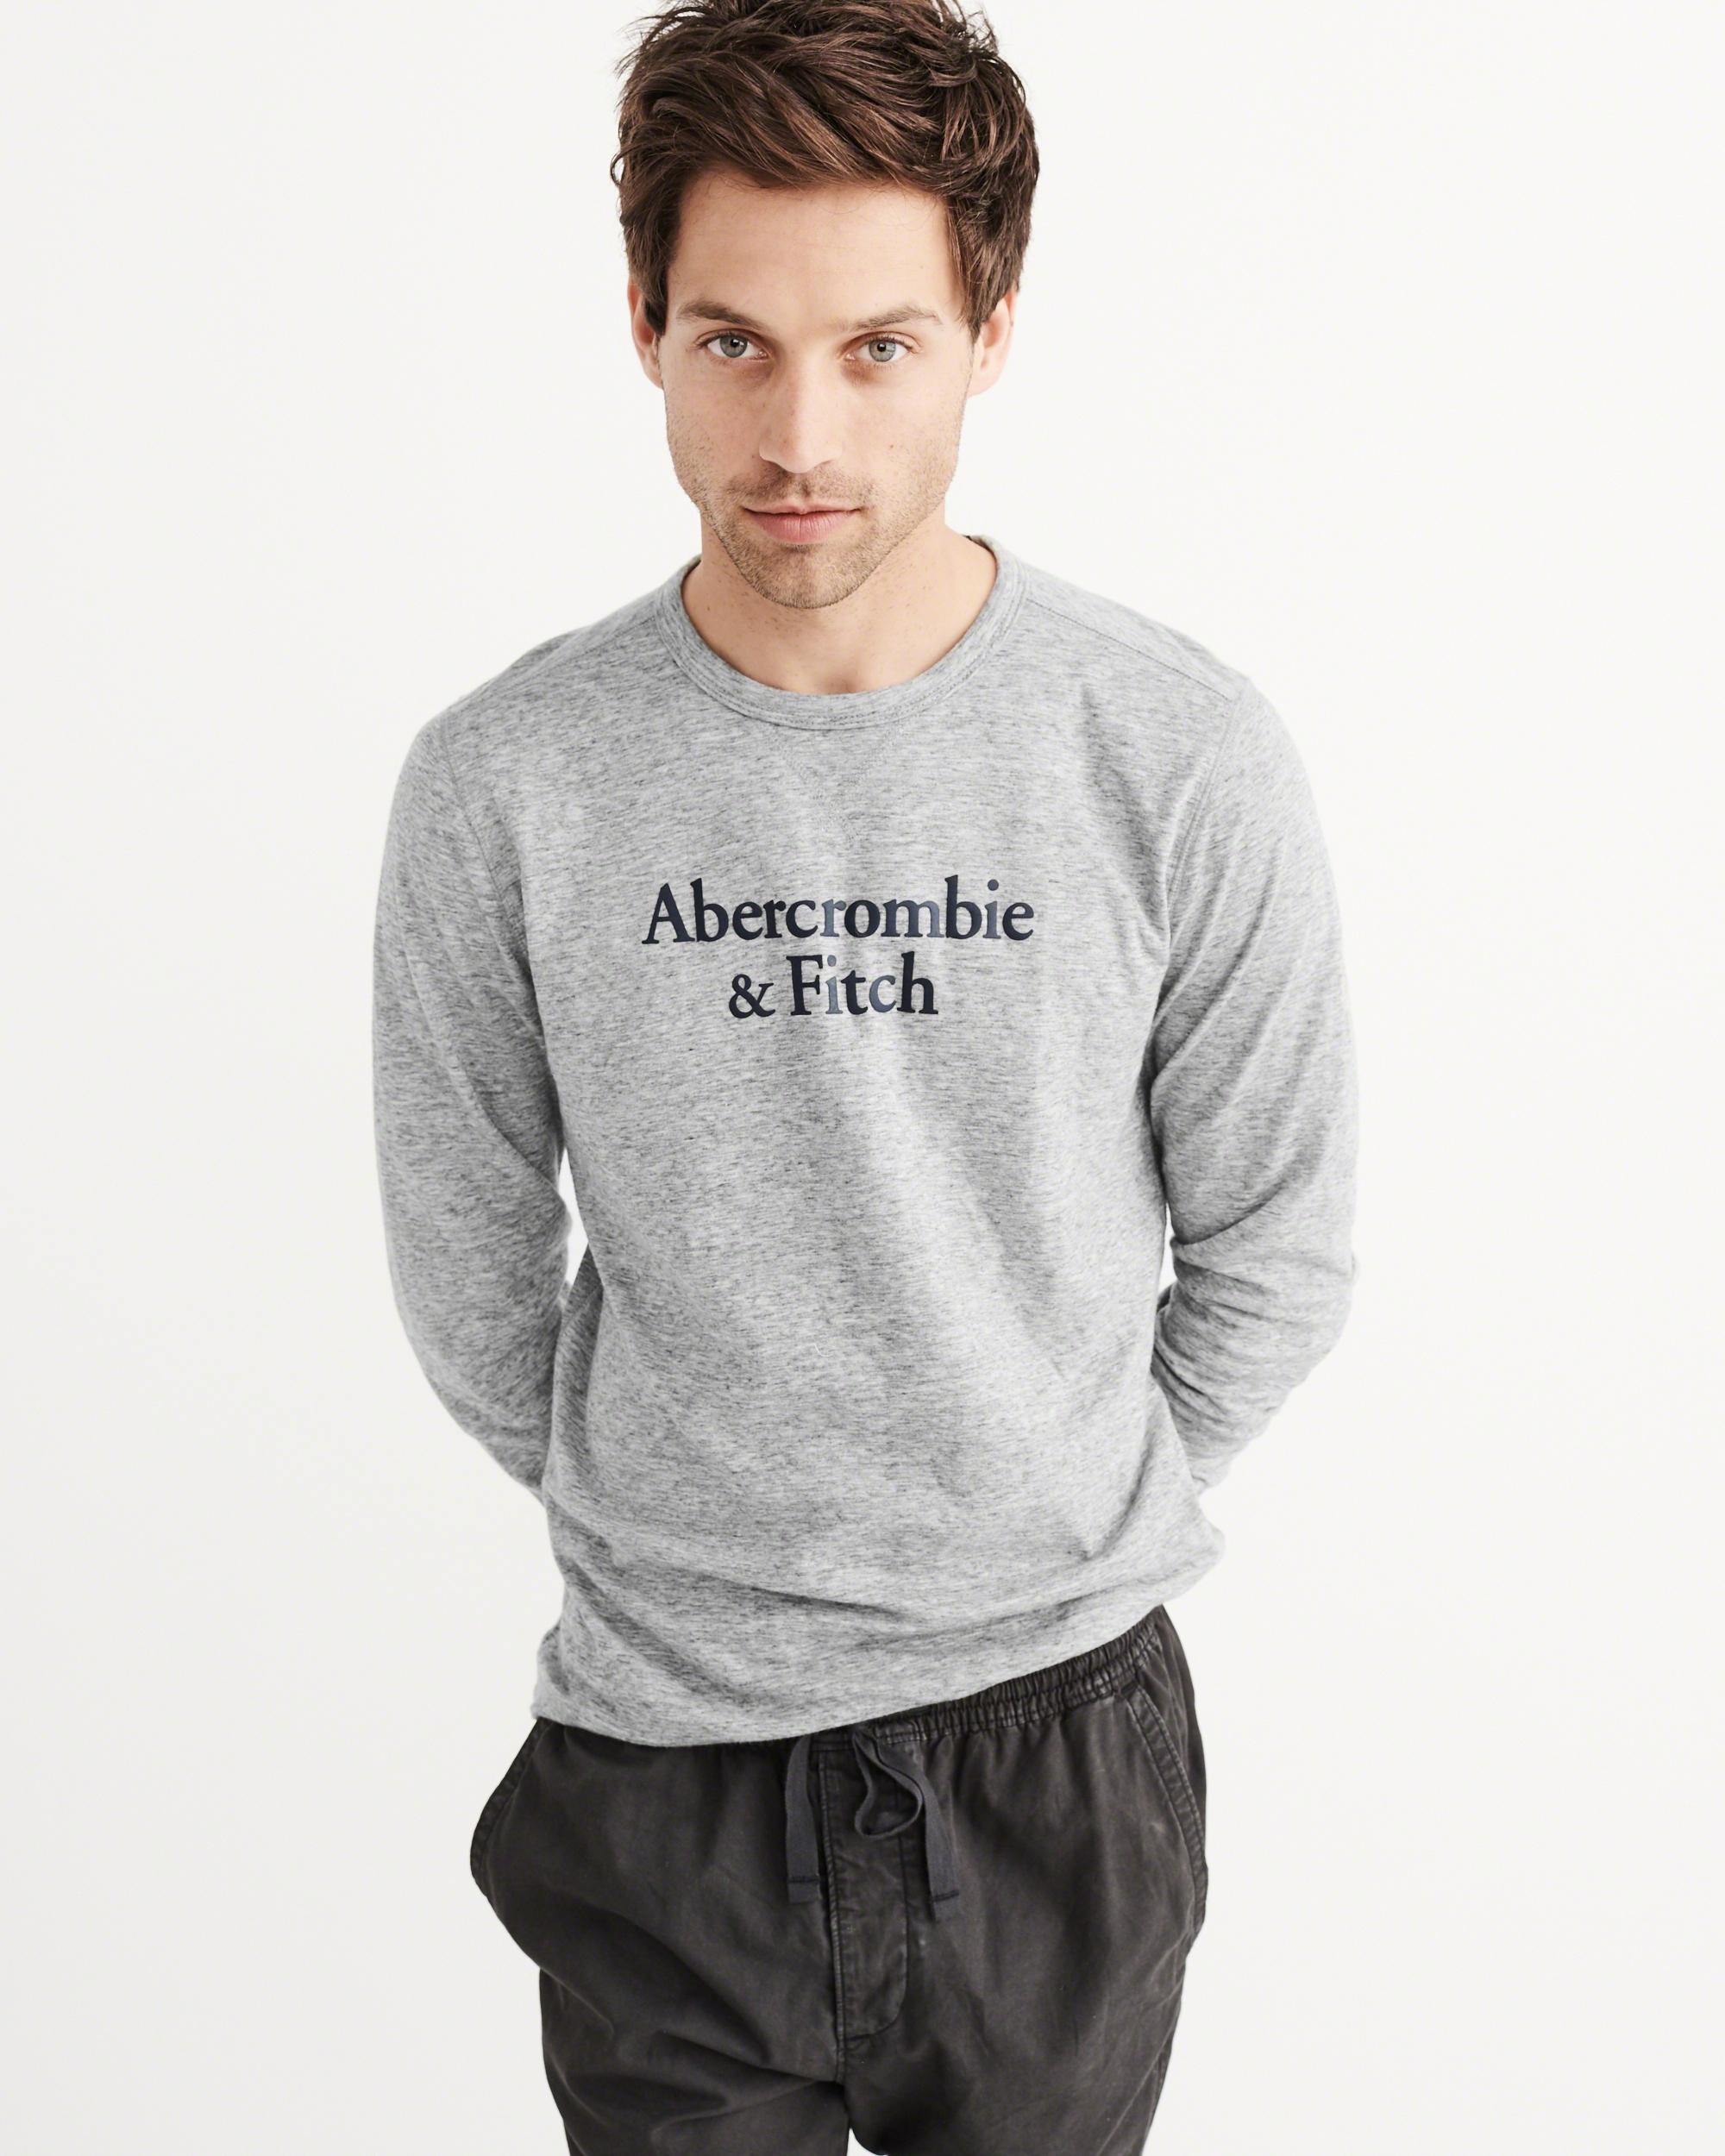 Lyst - Abercrombie & fitch Long Sleeve Graphic Tee in Gray for Men